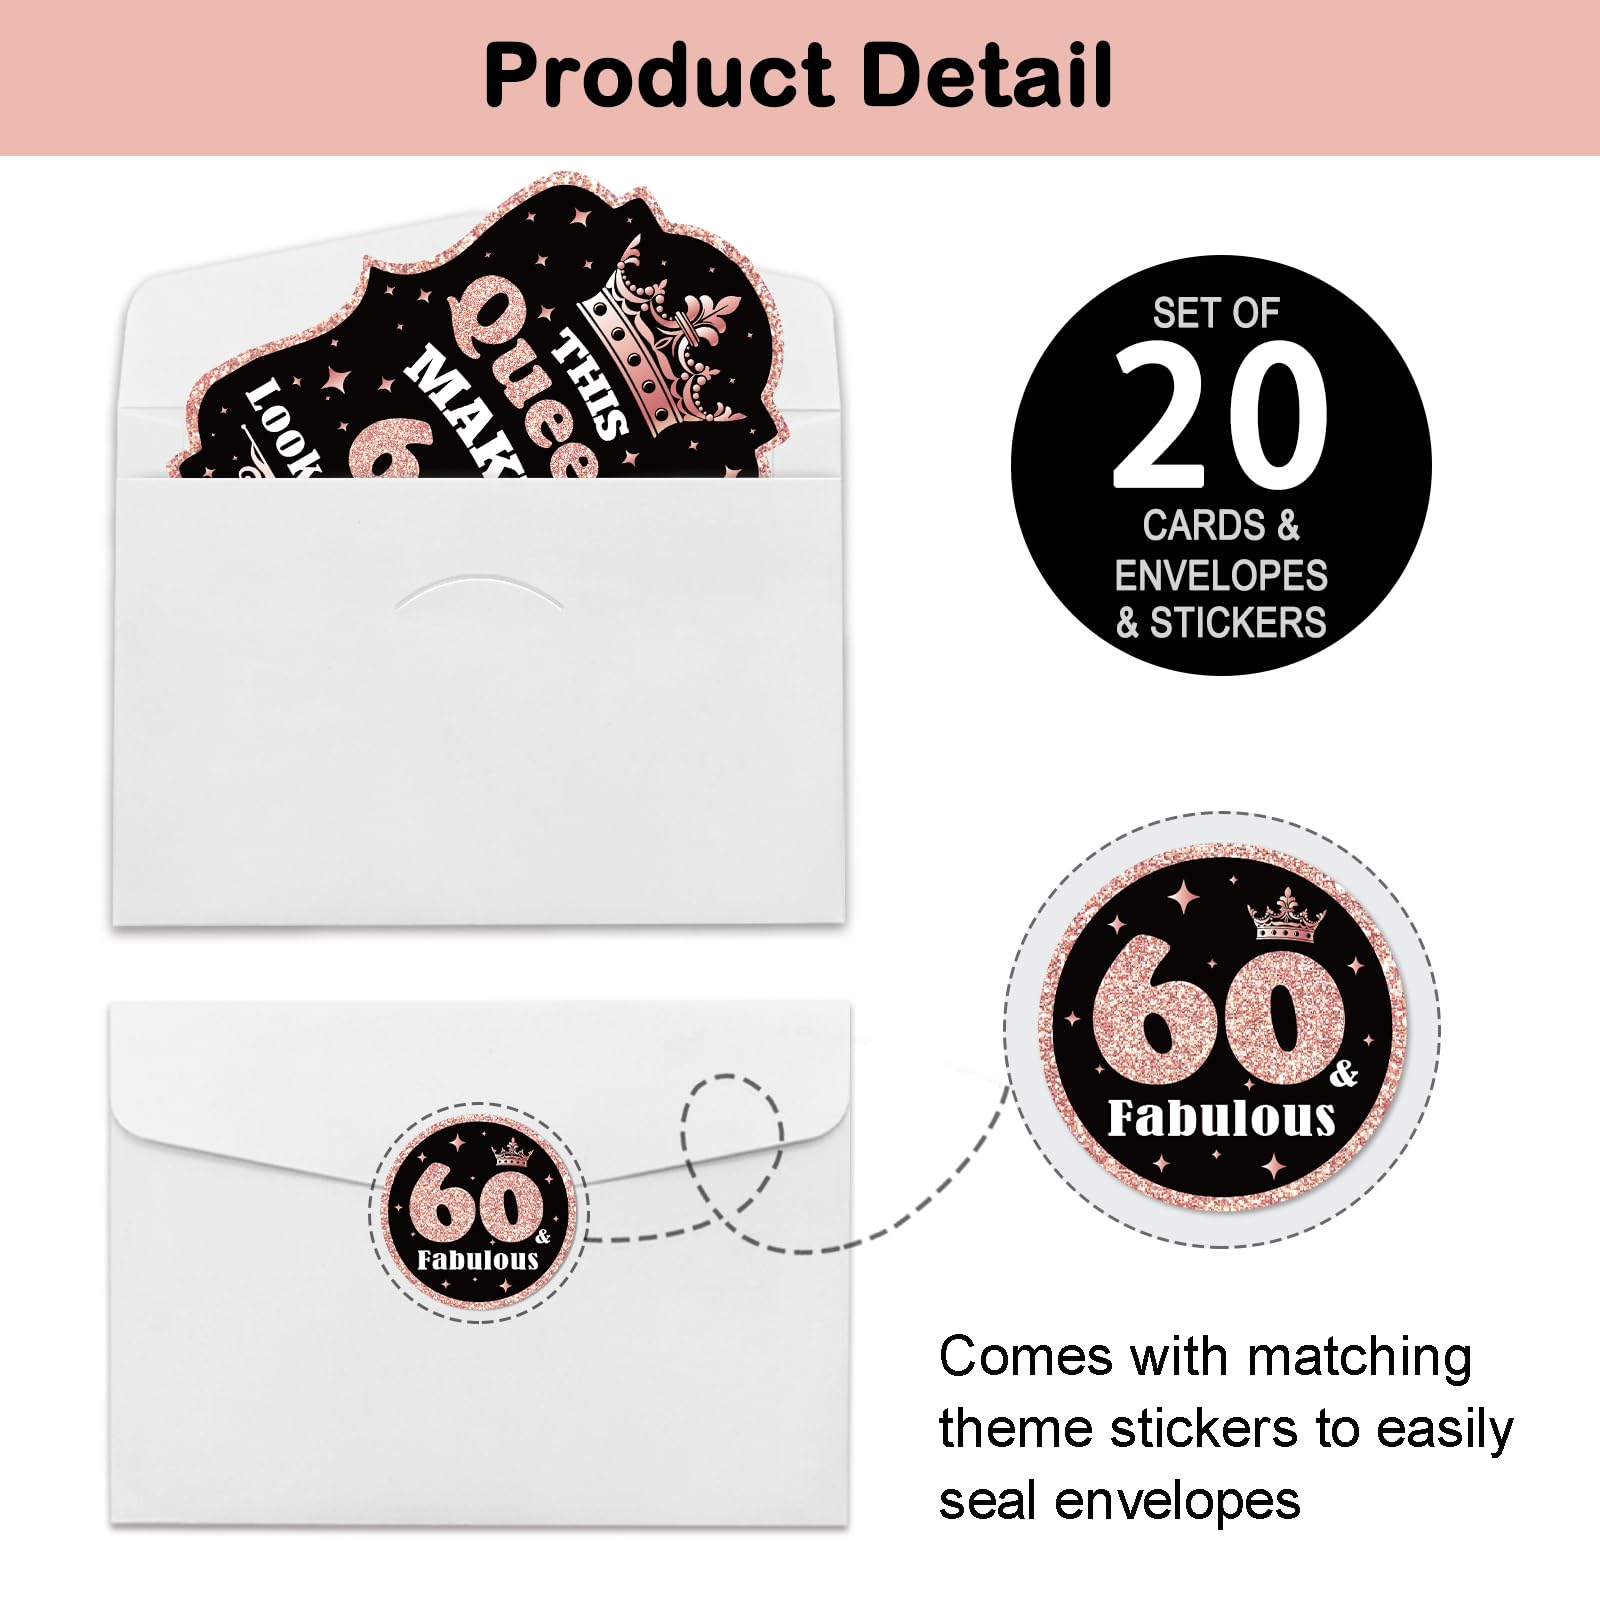 REWIDPARTY 20 Pack Woman 60th Birthday Party Invitation Cards with Envelopes & Stickers, Rose Gold 60th Birthday Shaped Fill-in Invitations 60th Birthday Anniversary Party Invites Supplies Favors